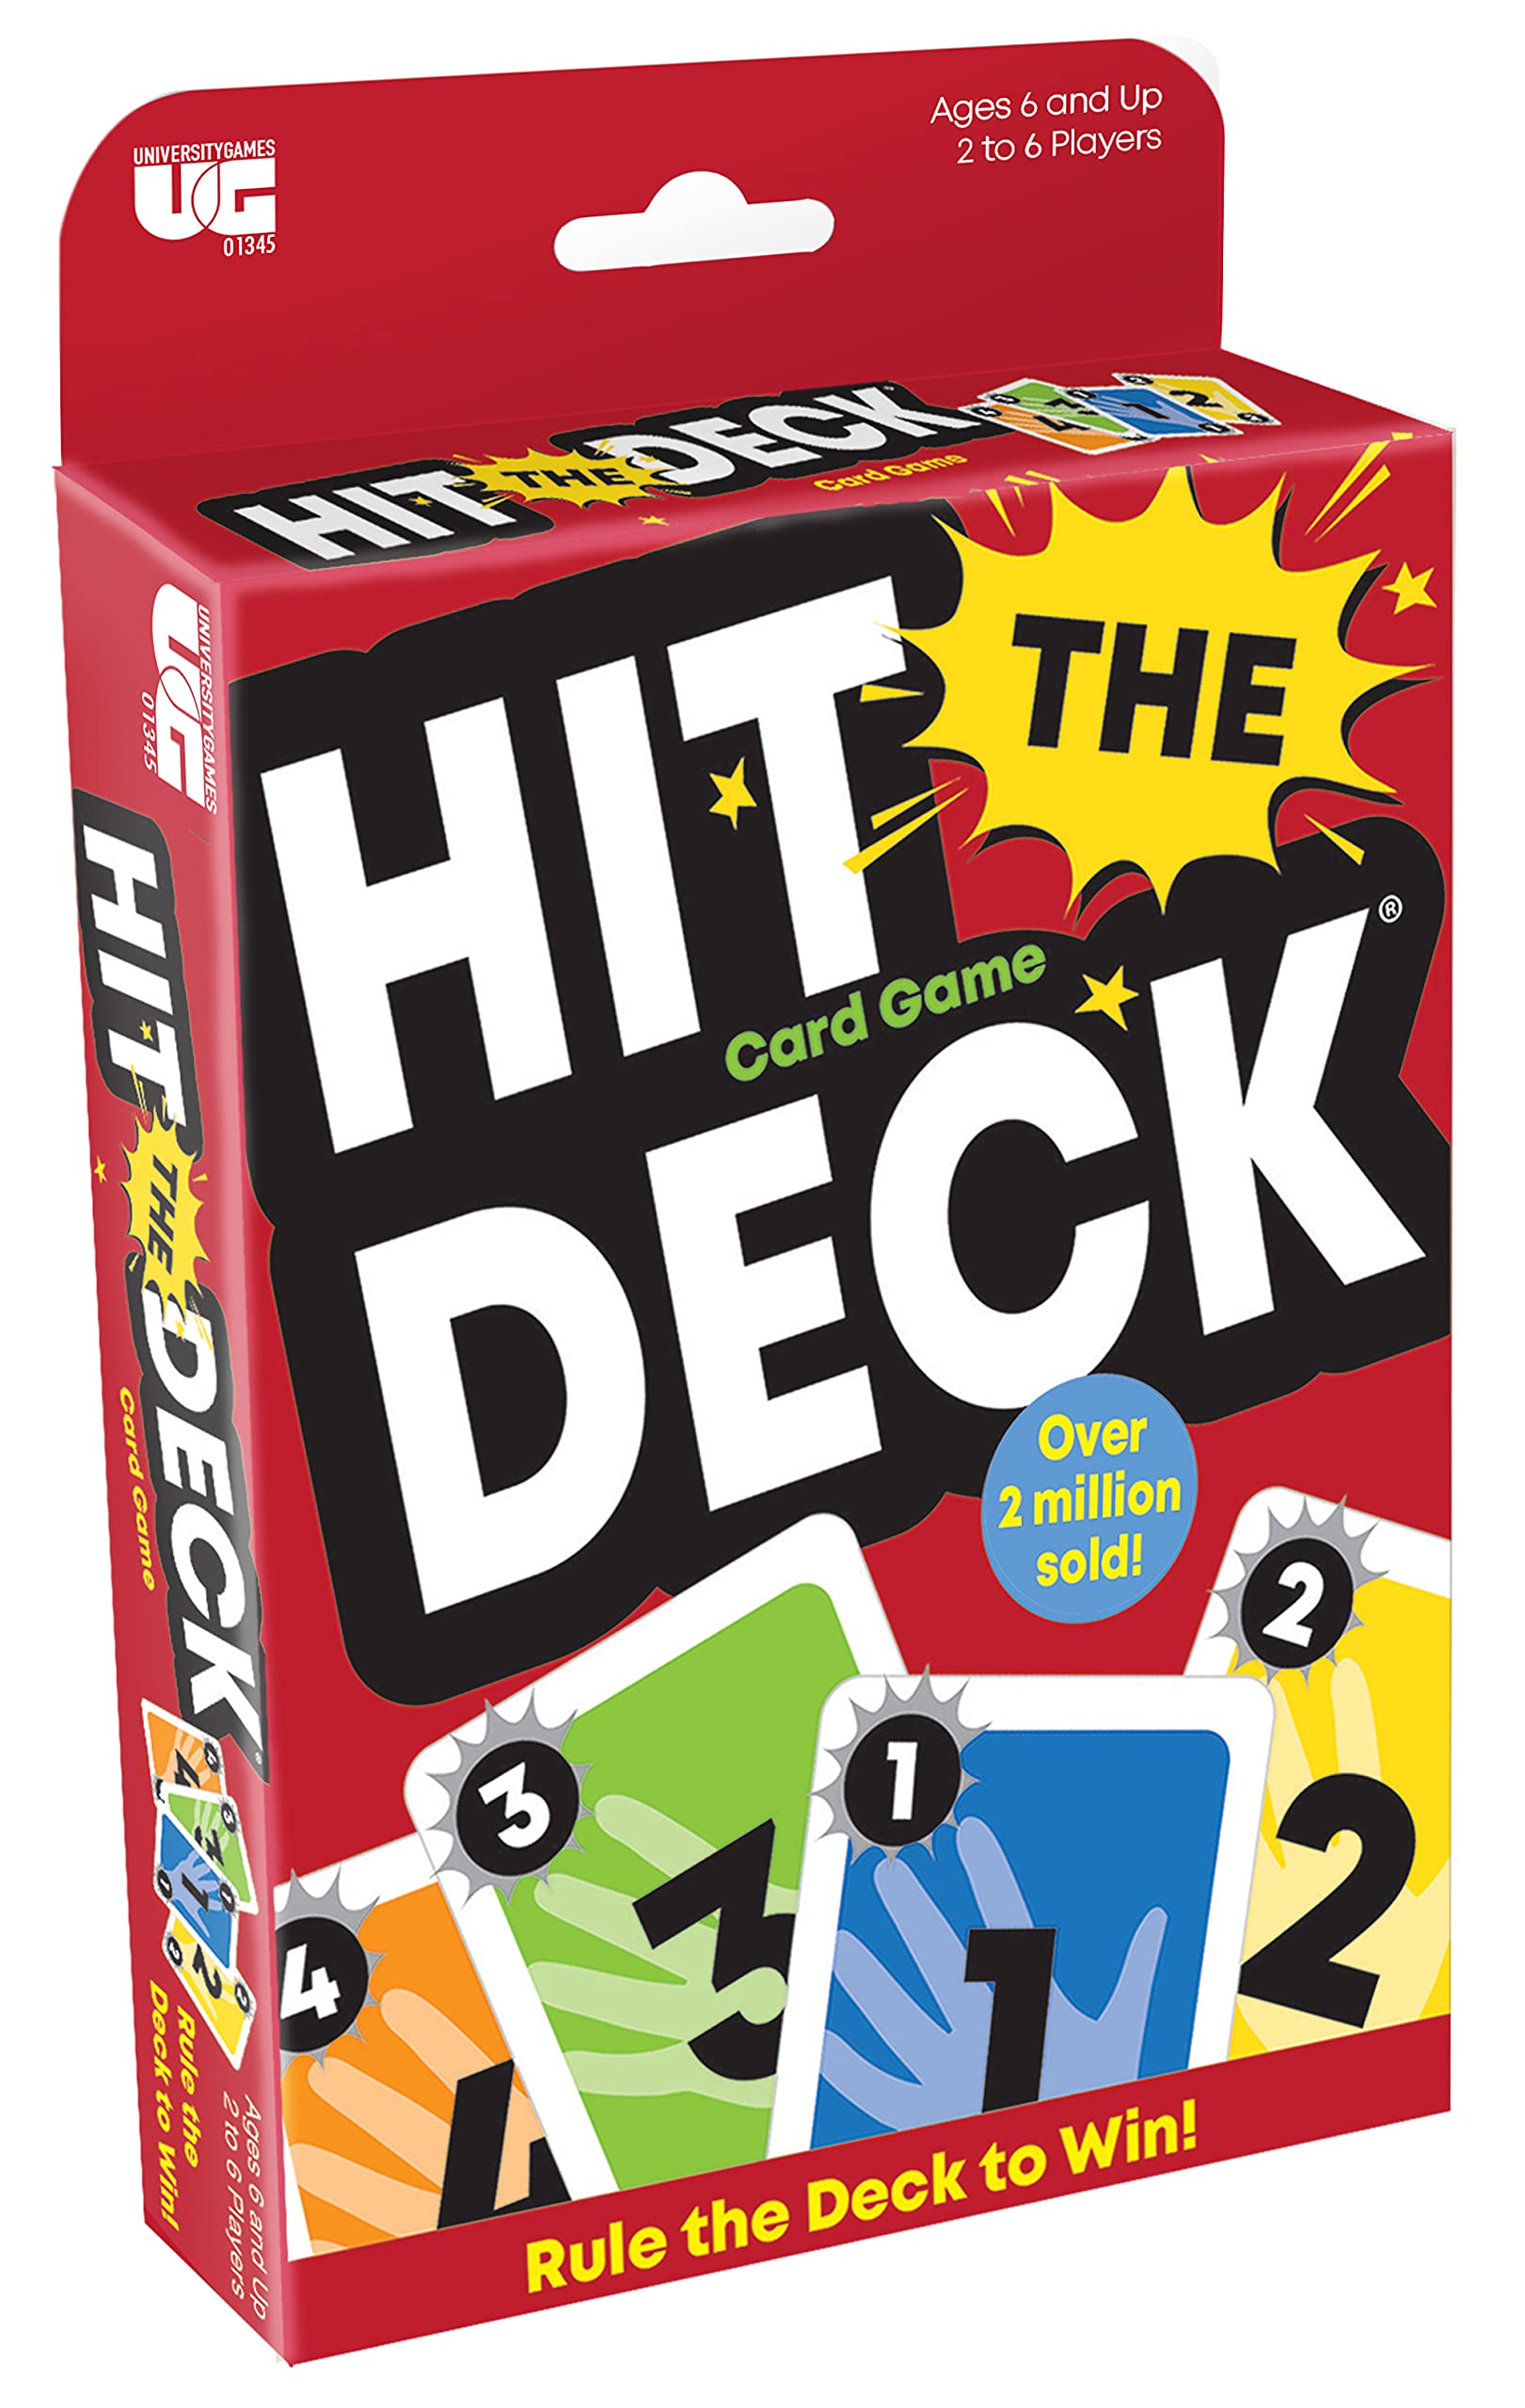 University Games Hit The Deck Card Game, Multi